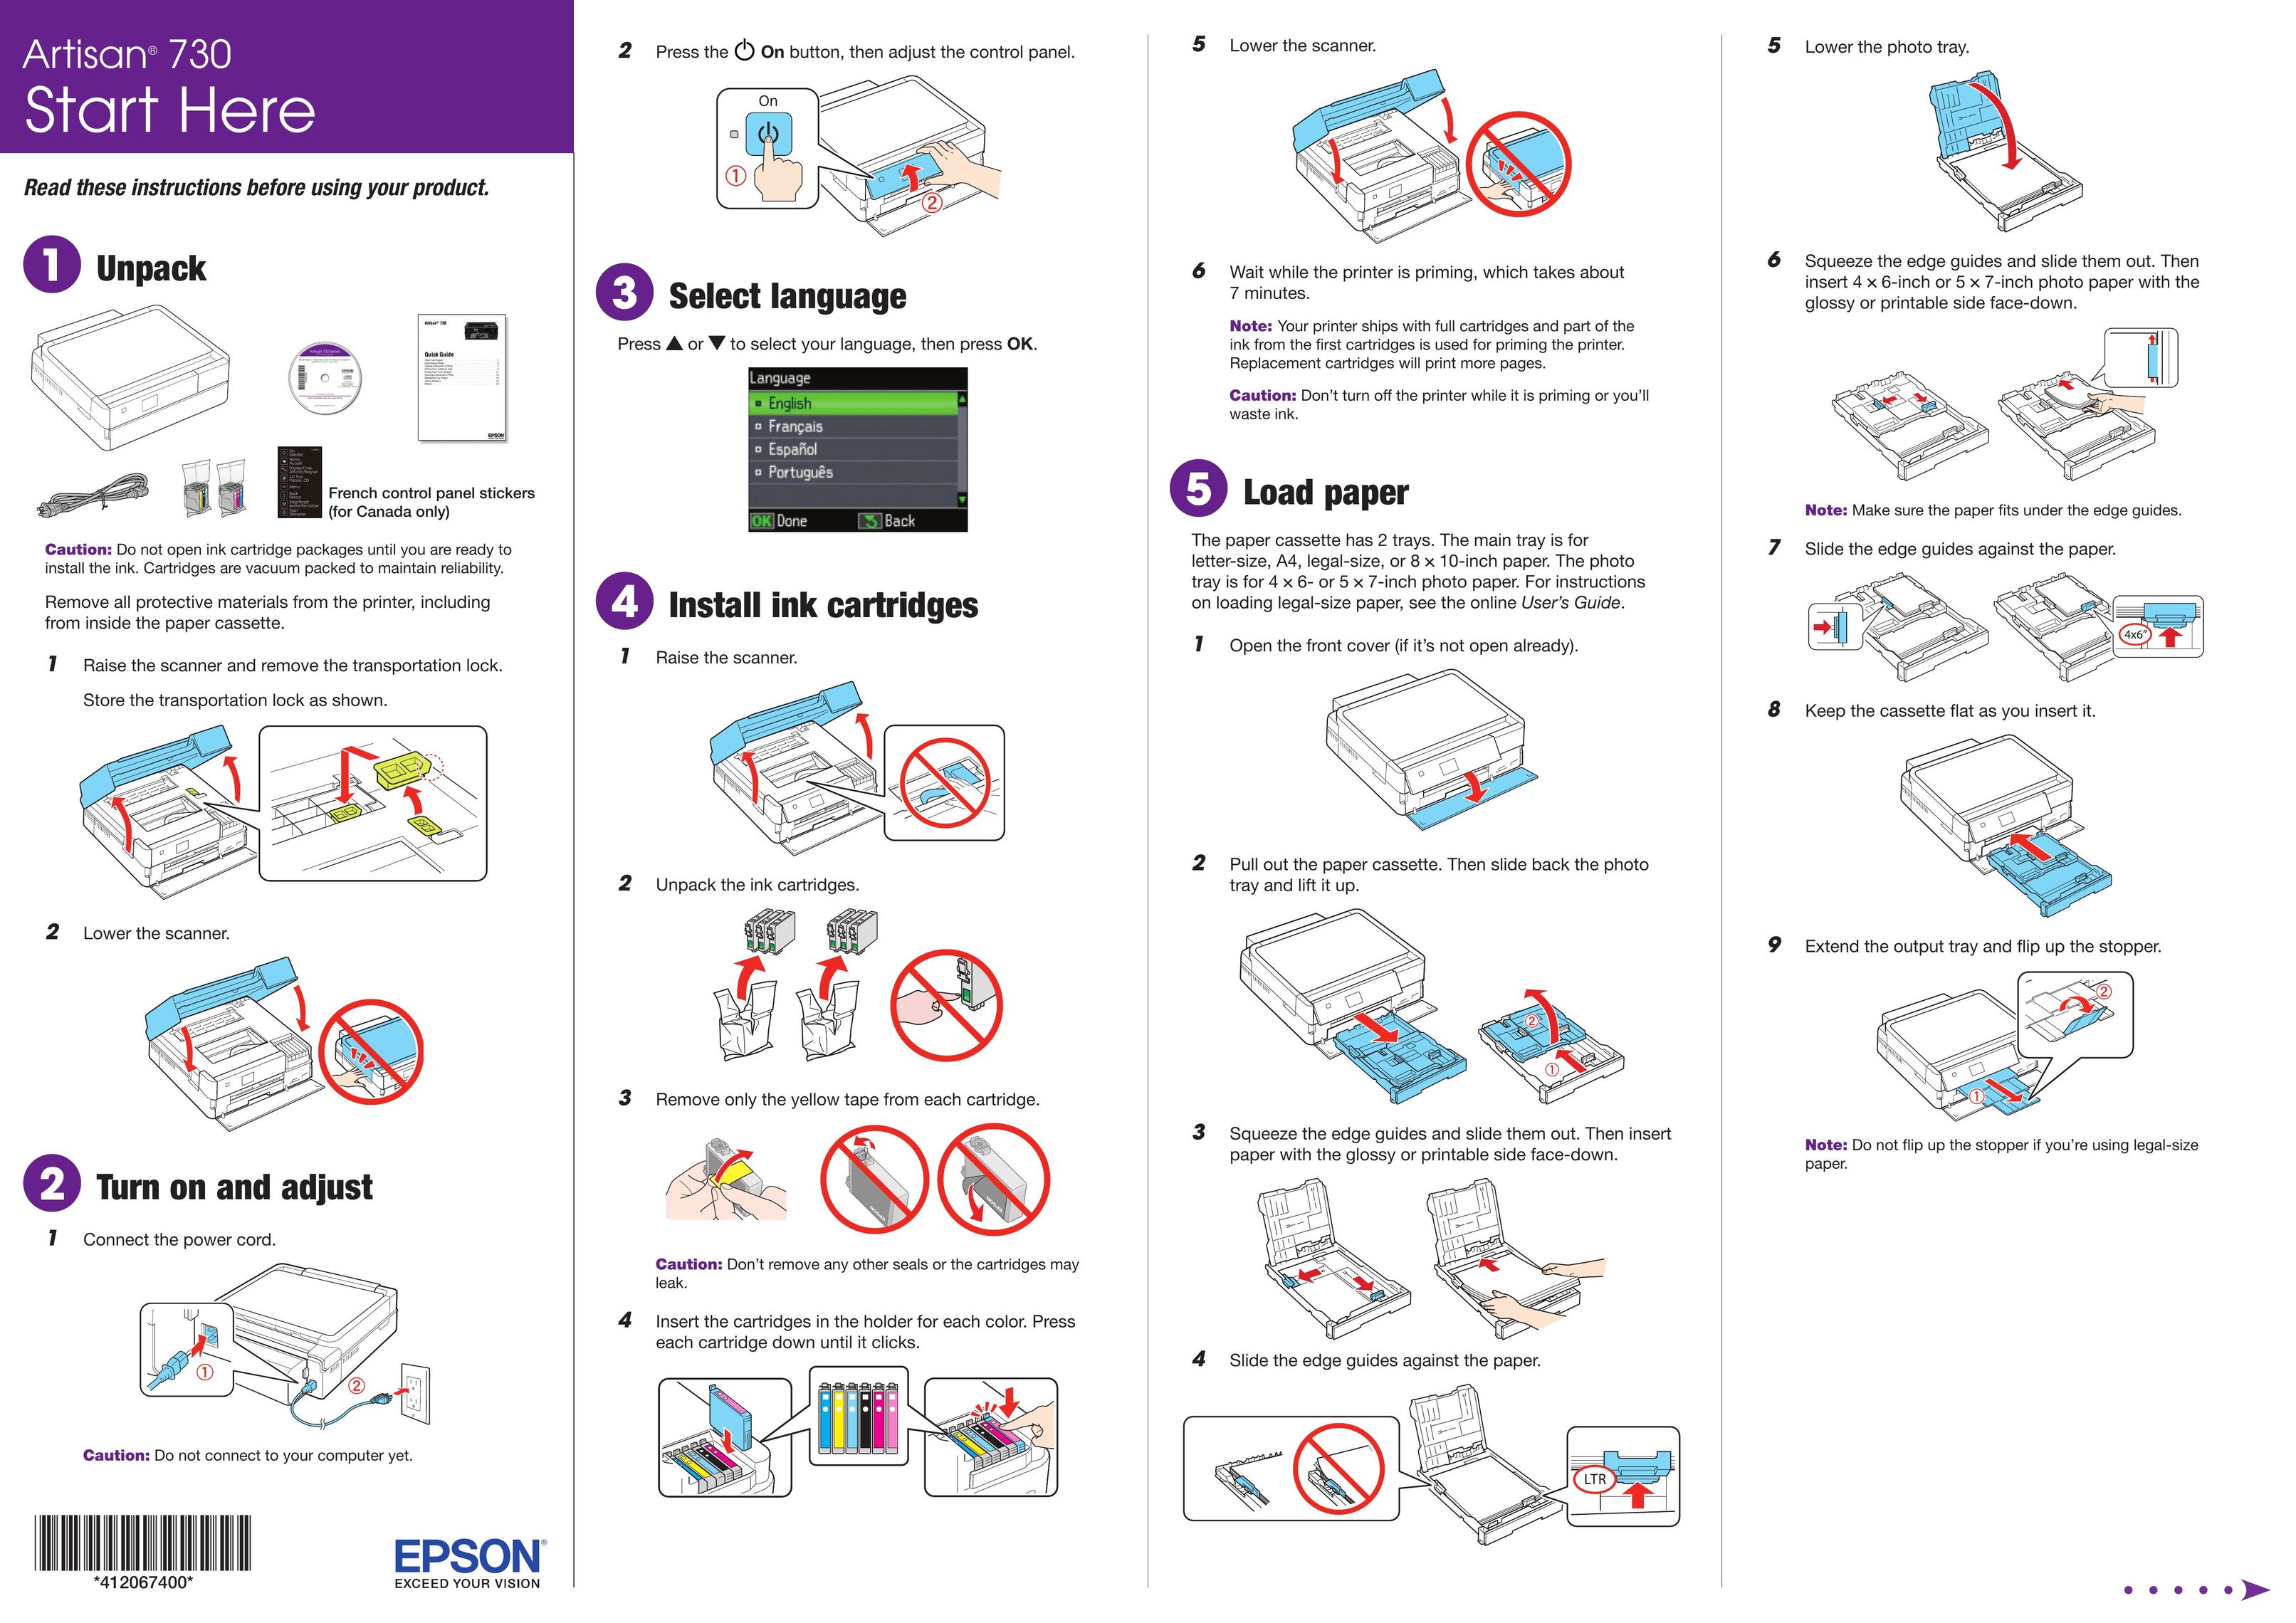 Epson 730 All in One Printer User Manual (Page 1)